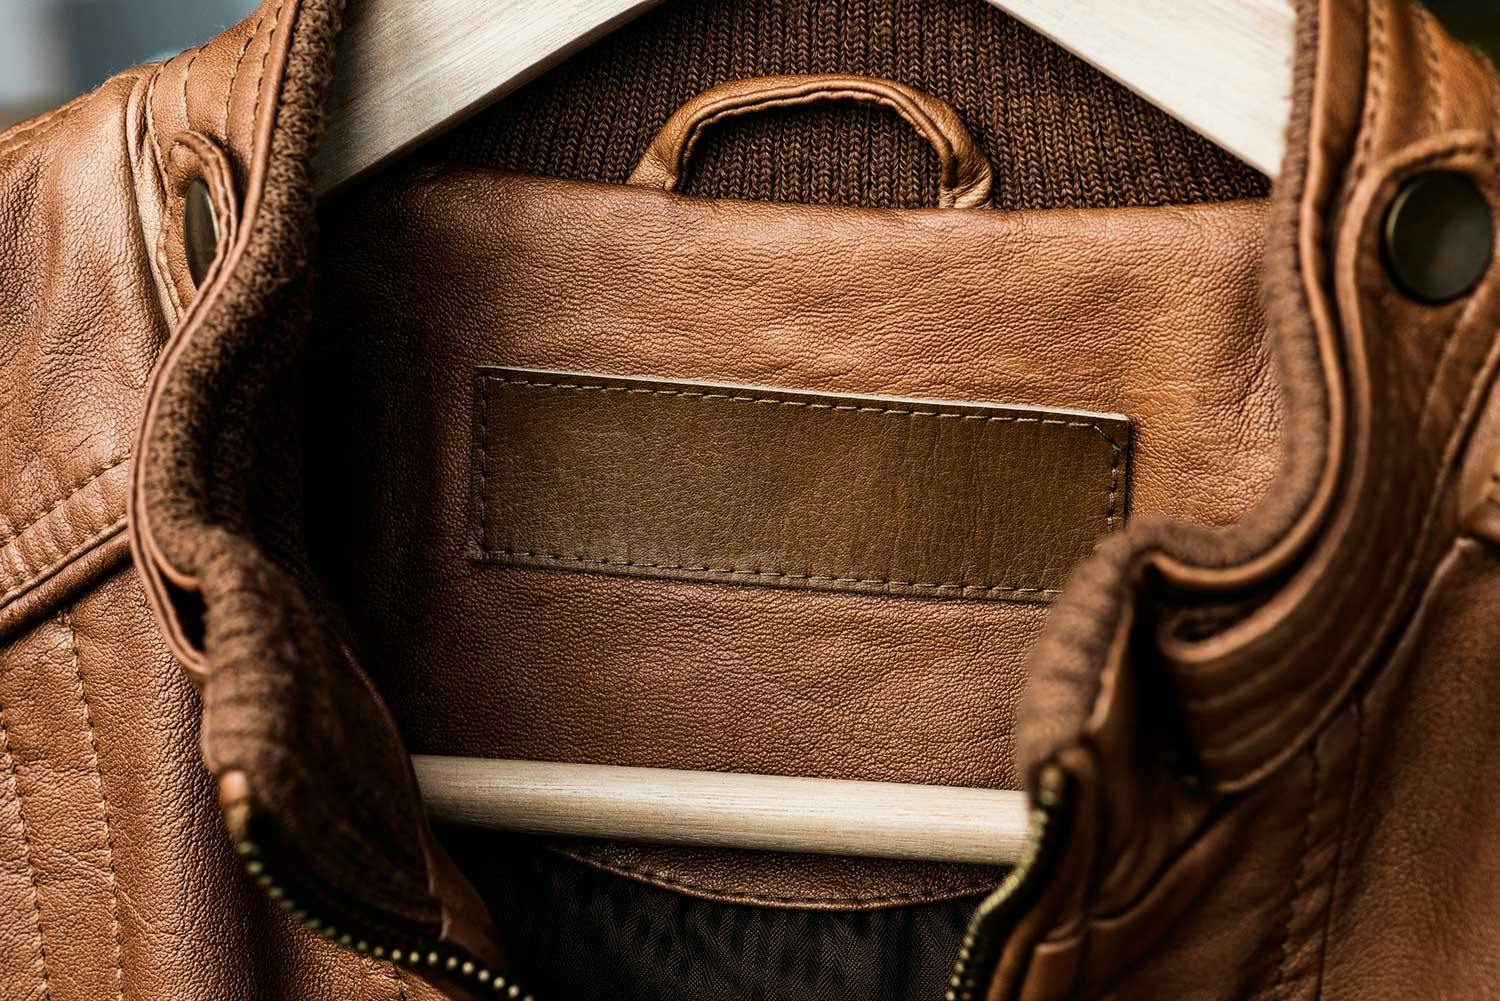 Close-up of a rectangular, dark brown leather patch on the interior neck area of a brown leather jacket.